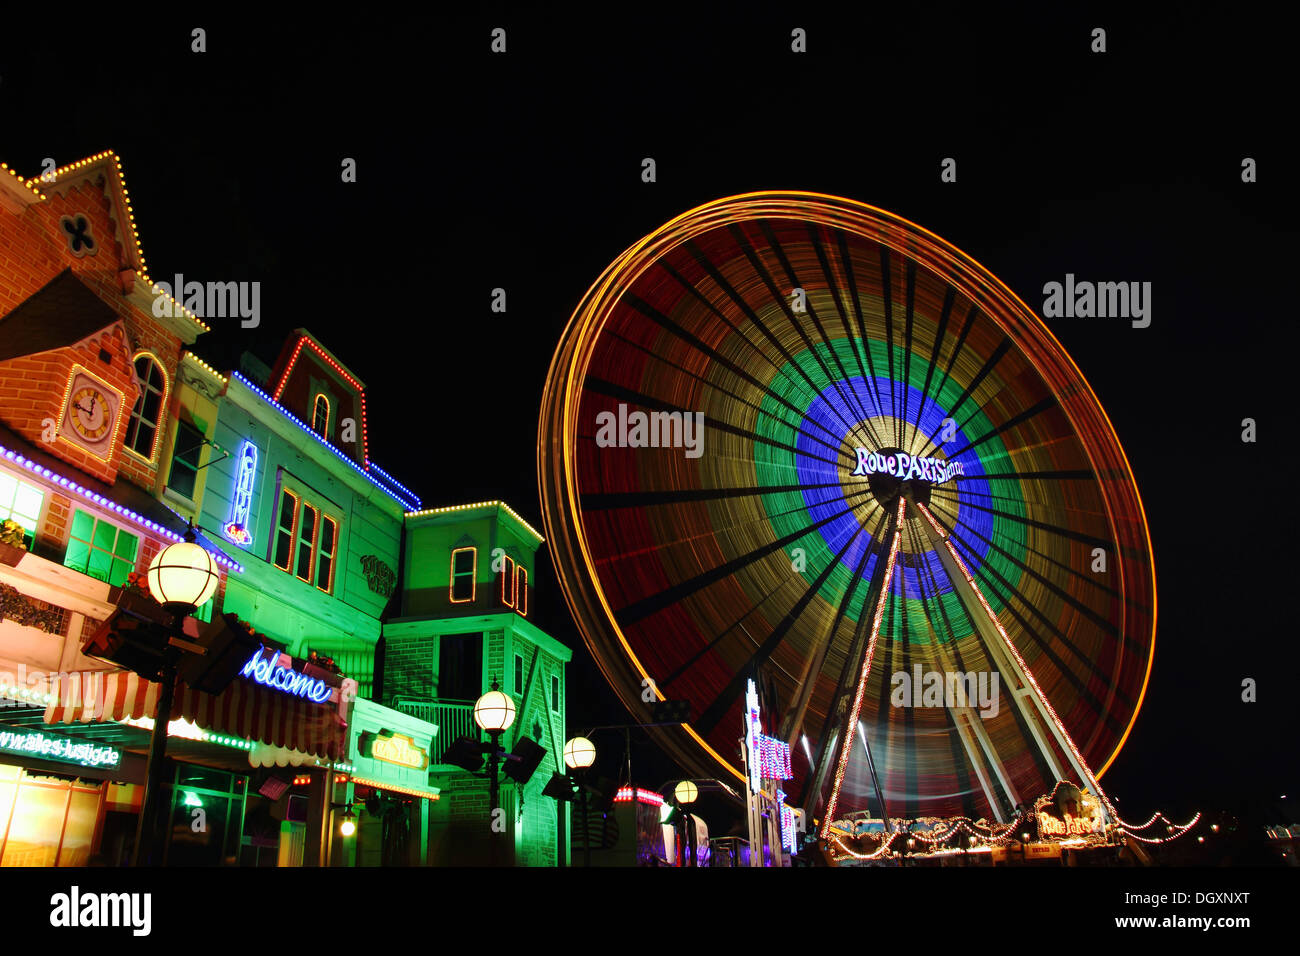 Funfair Funfairs Pleasure Parks Amusement Parks Fun Park Fun Parks  Amusement Ride Amusement Rides High Resolution Stock Photography and Images  - Alamy